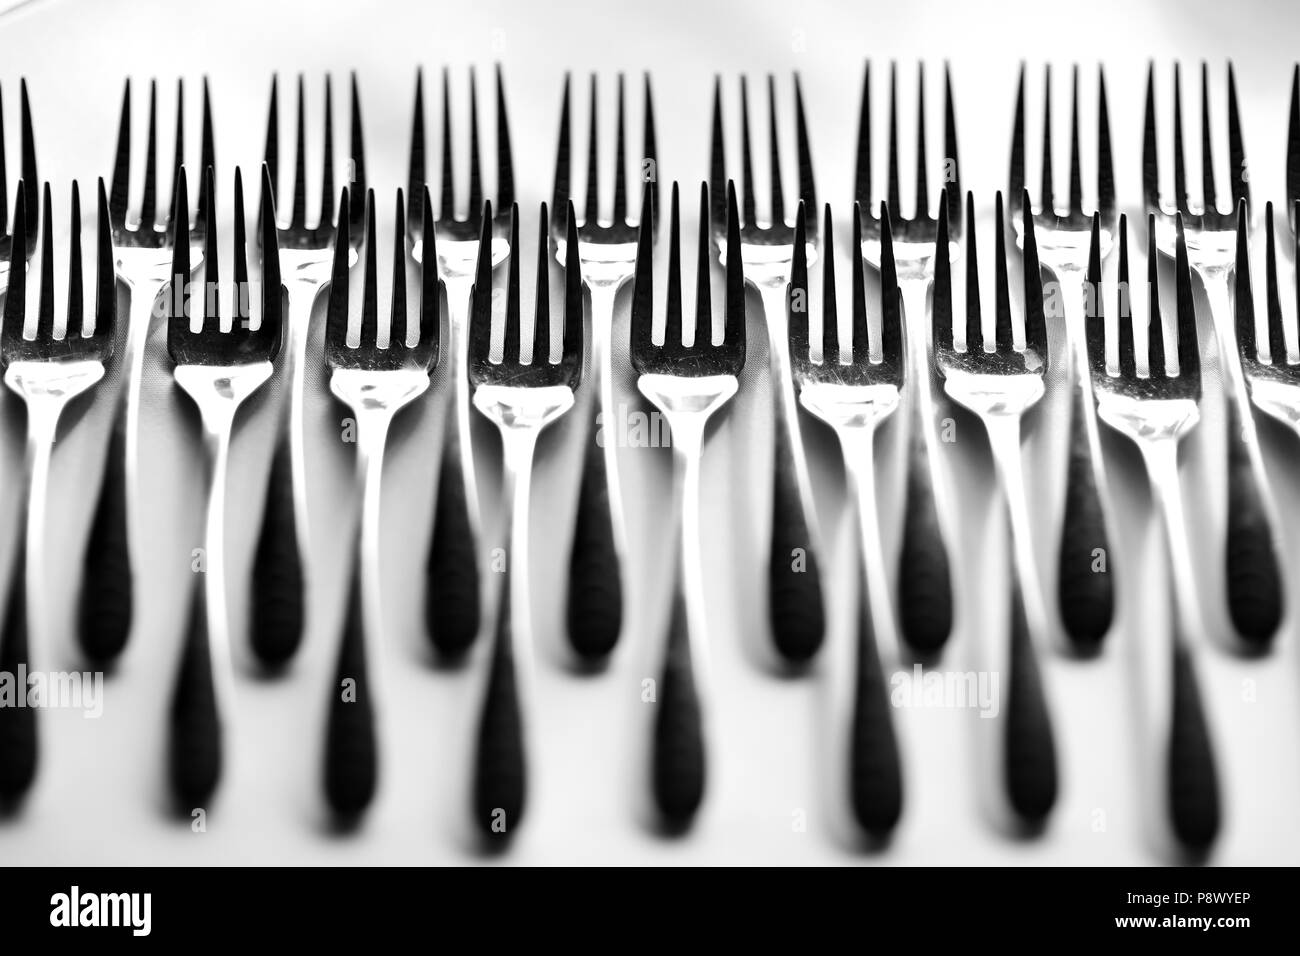 Row of forks on a white tablecloth Stock Photo